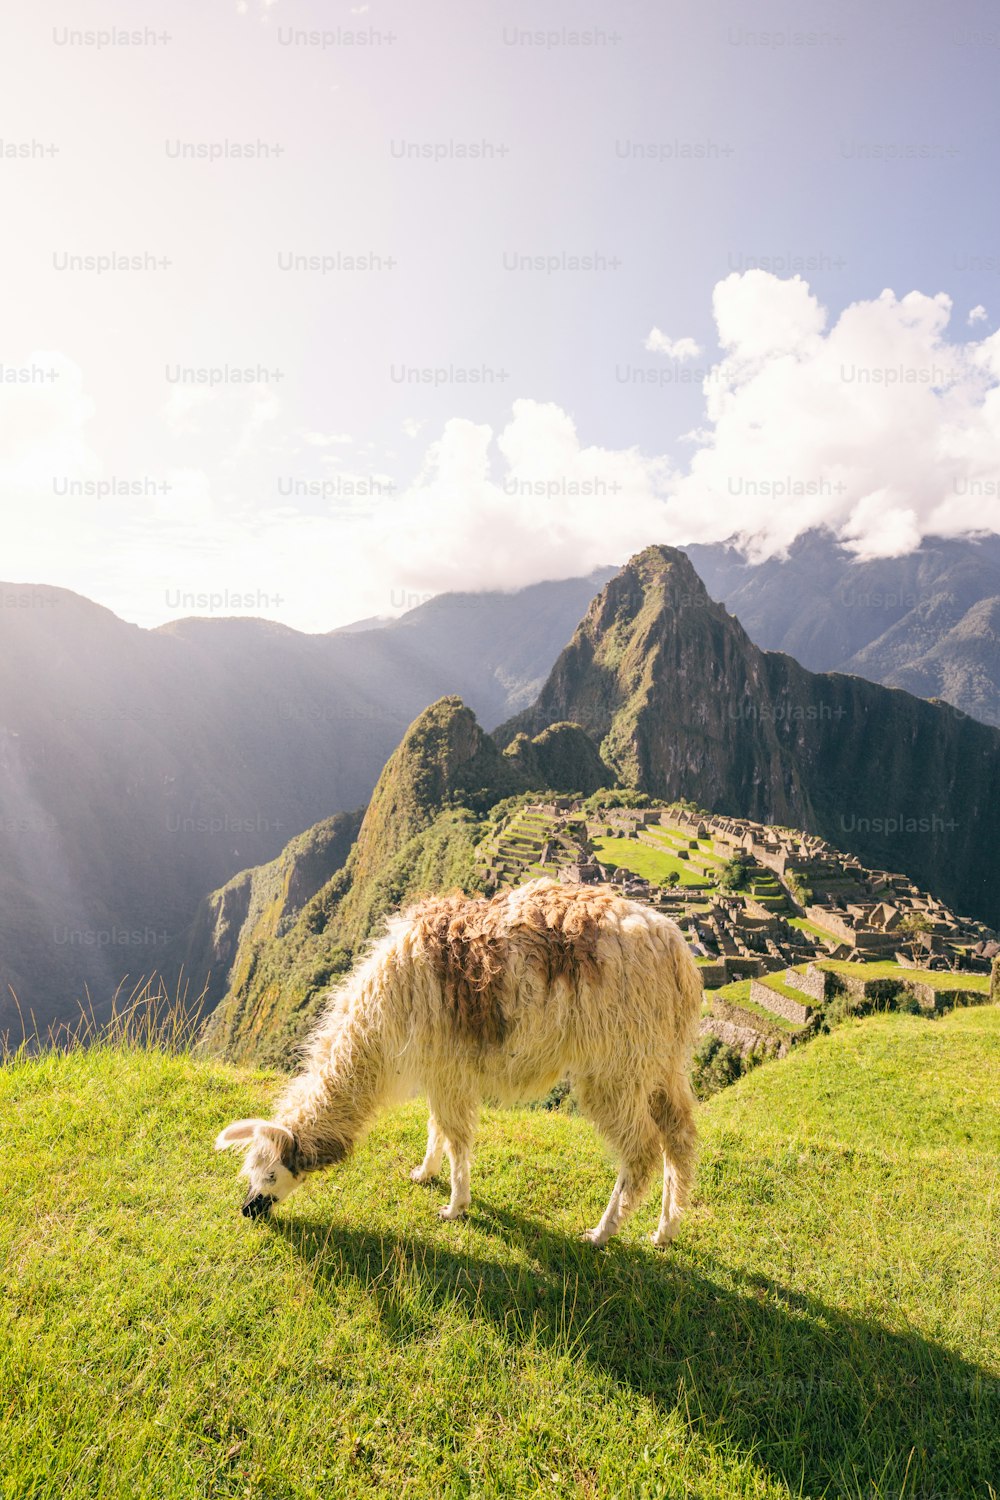 a llama grazing in a grassy field with mountains in the background